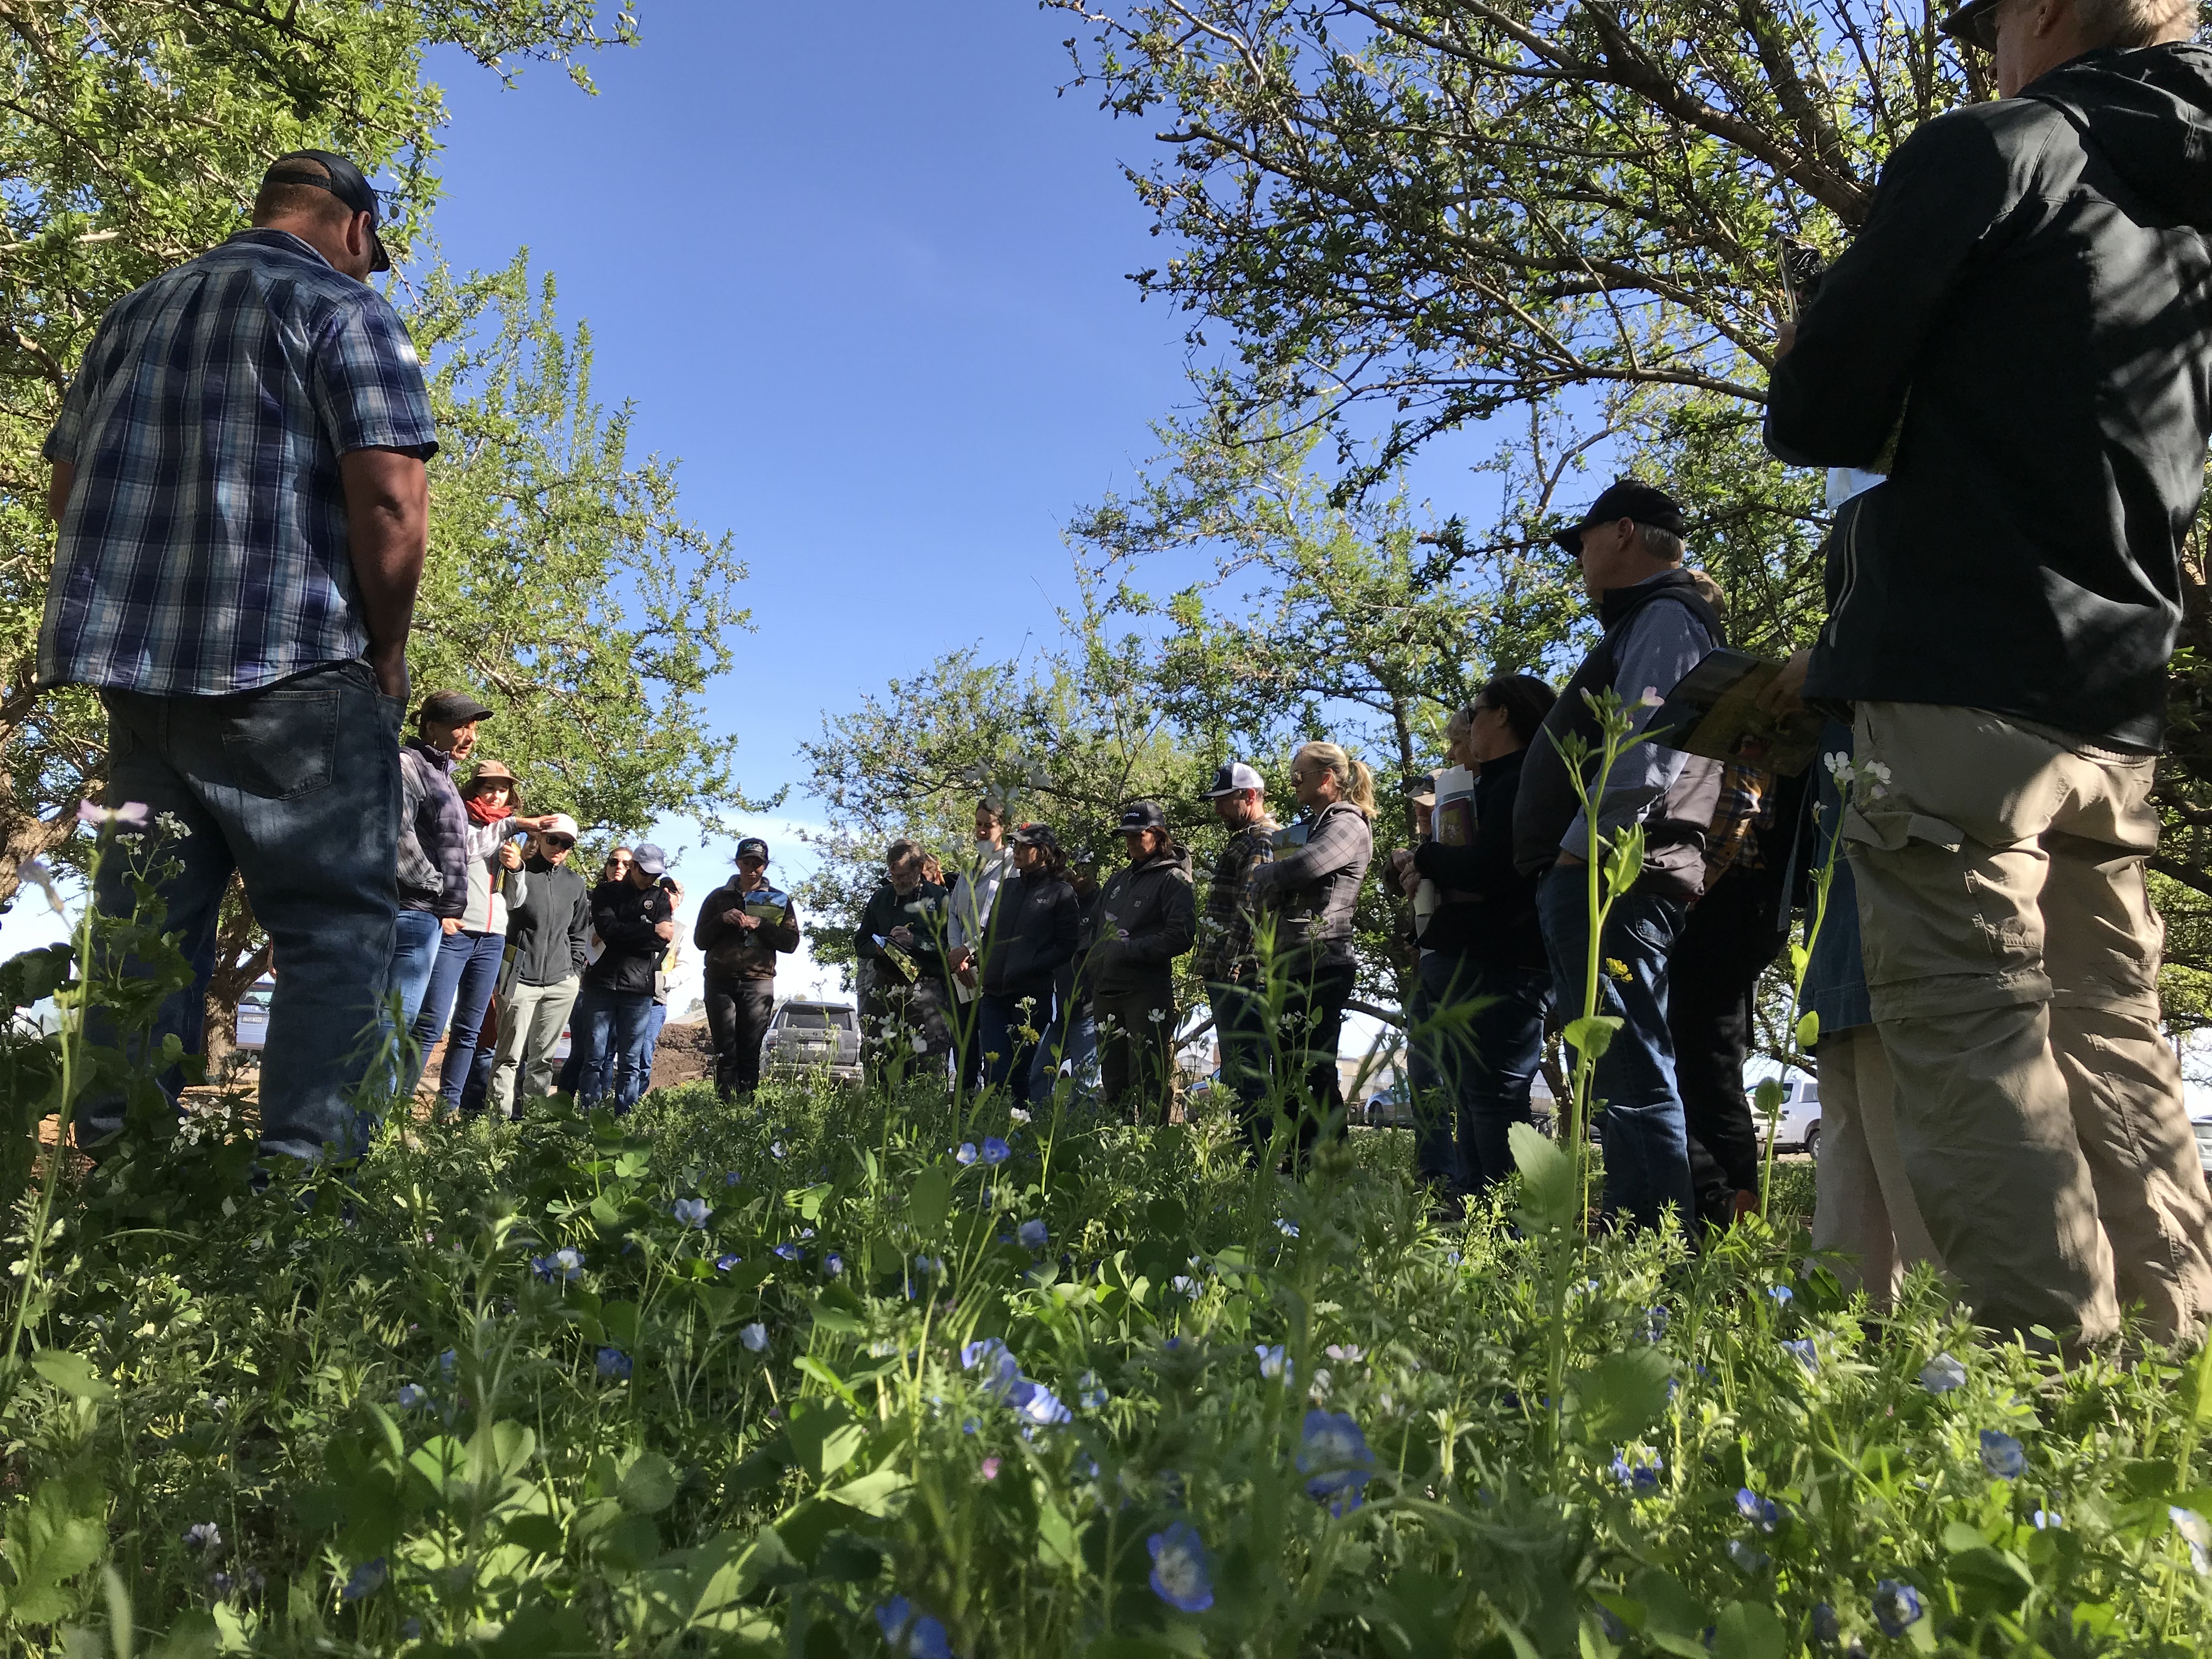 Xerces staff and almond growers standing in an orchard with small blue flowers as cover crops, underfoot.